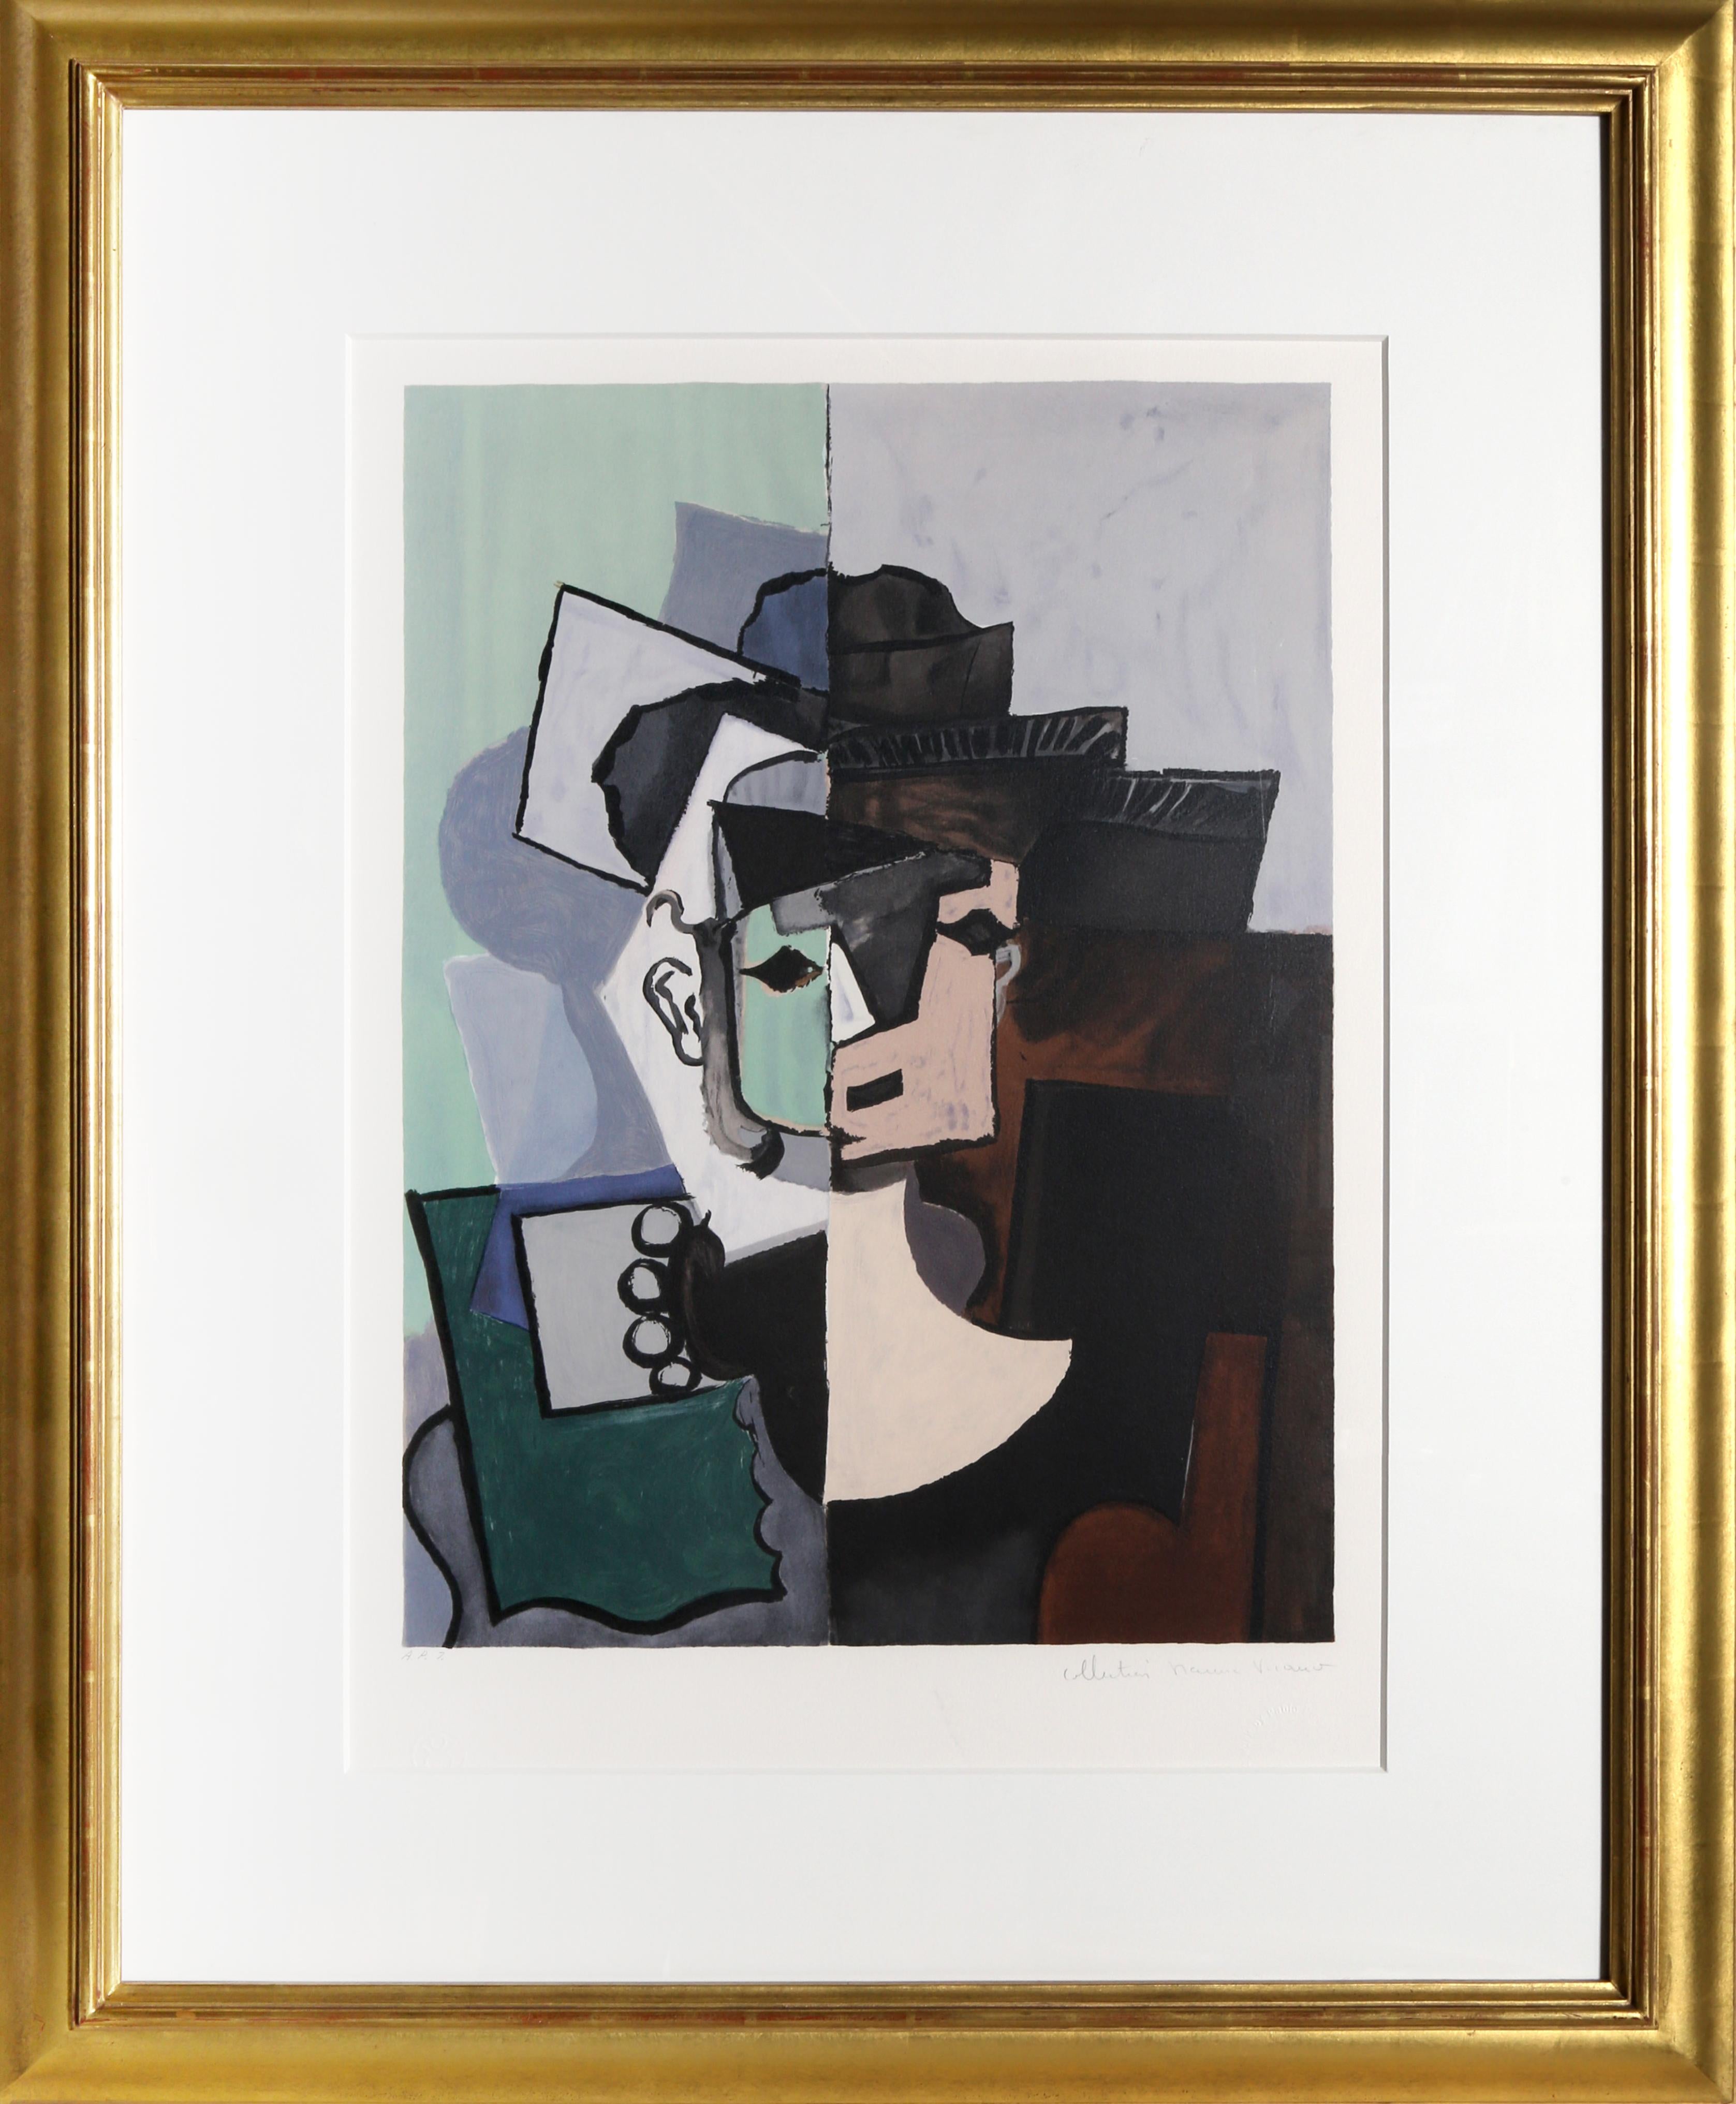 A lithograph from the Marina Picasso Estate Collection after the Pablo Picasso painting "Portrait de Face sur Fond Rose et Vert".  The original painting was completed in 1917. In the 1970's after Picasso's death, Marina Picasso, his granddaughter,